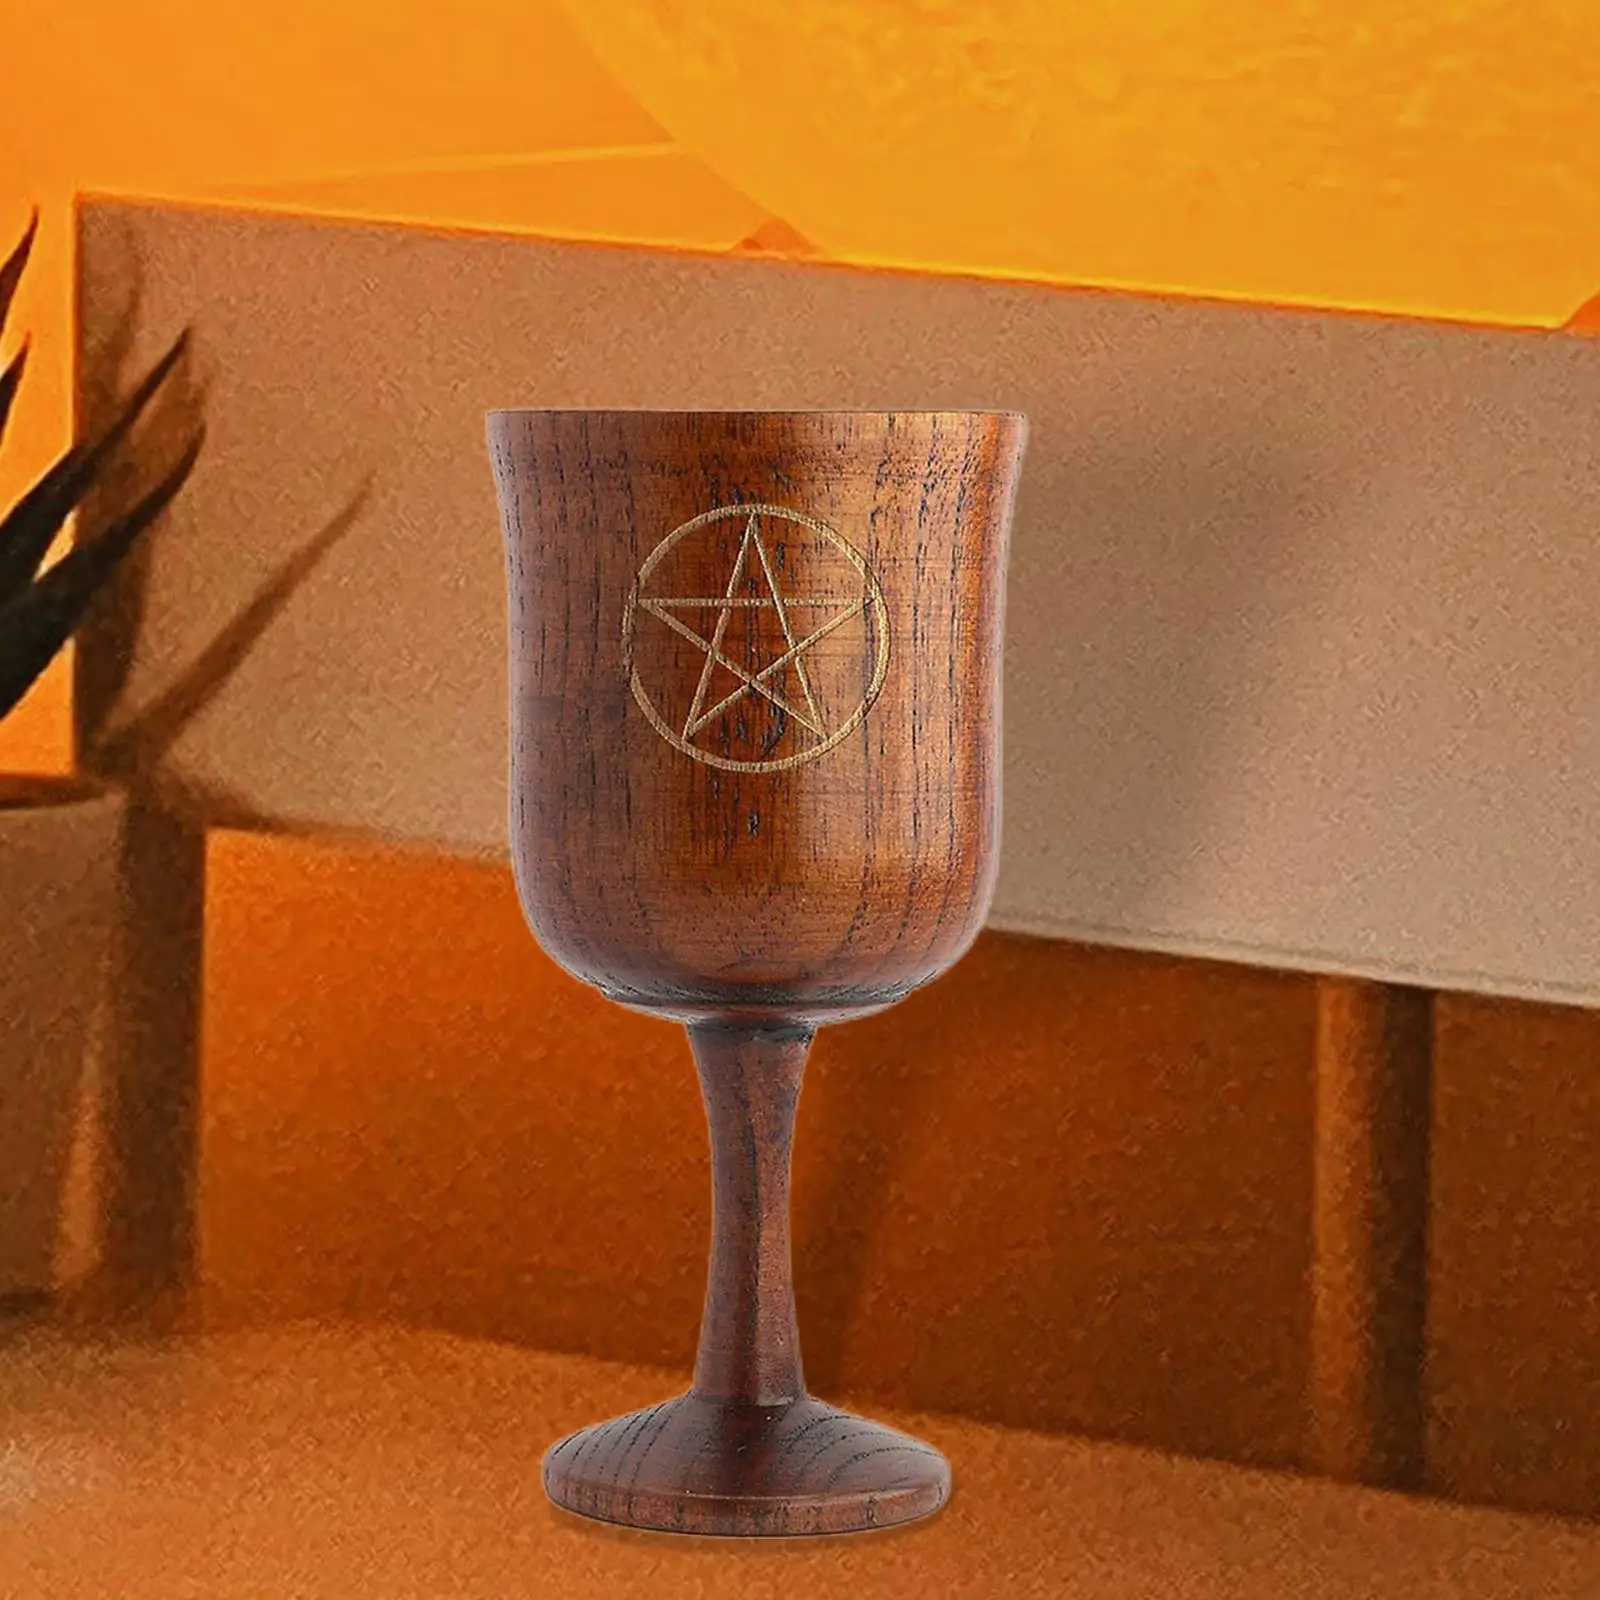 Religious Ritual Cup Tea Mug Altar Goblets Pentacle Drinkware Wine Glasses Divination Tarot Witchcraft Wooden Goblet